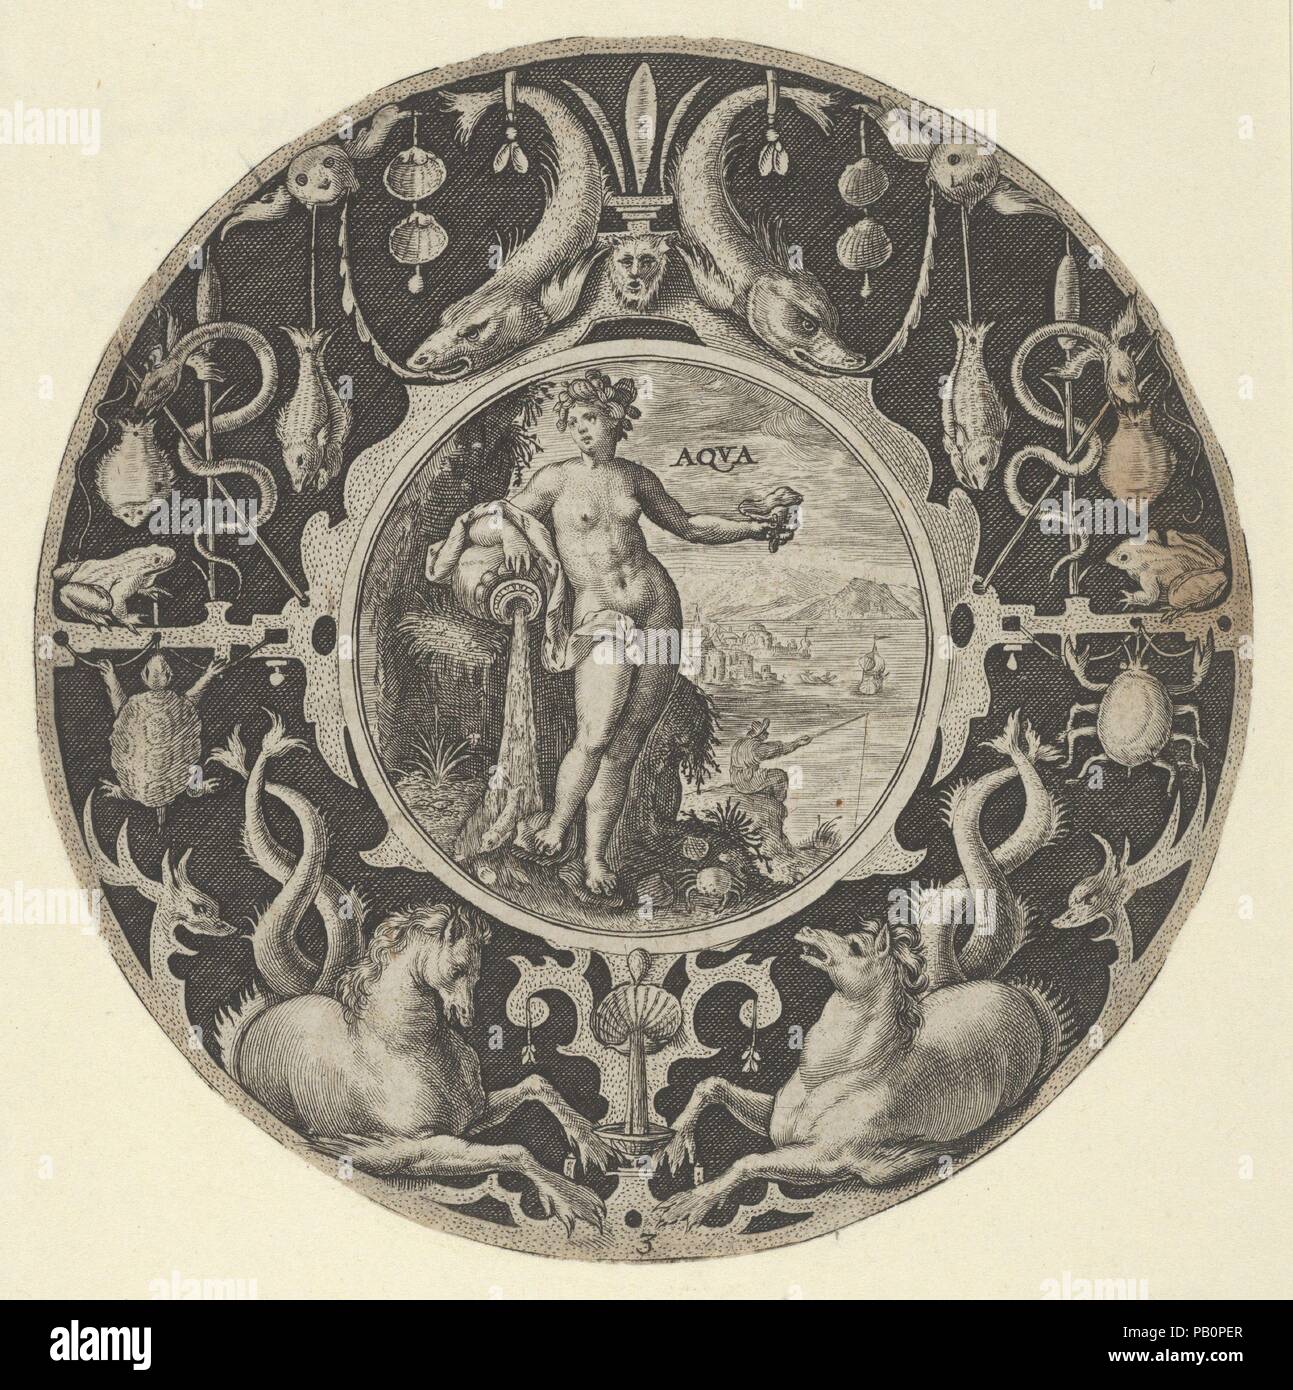 'Aqua' in a Decorative Border with Sea Creatures, from a Series of Circular Designs with the Four Elements. Artist: Crispijn de Passe the Elder (Netherlandish, Arnemuiden 1564-1637 Utrecht). Dimensions: Sheet: 5 × 4 3/4 in. (12.7 × 12.1 cm). Date: 1590-1612.  Design for a circular plate with the element of Water personified as a standing female figure holding a shell in her left and and leaning on an over turned vessel, which issues a stream of water and fish. This scene is shown in a medallion at center and is surrounded by a broad band with various aquatic animals and sea monsters, including Stock Photo